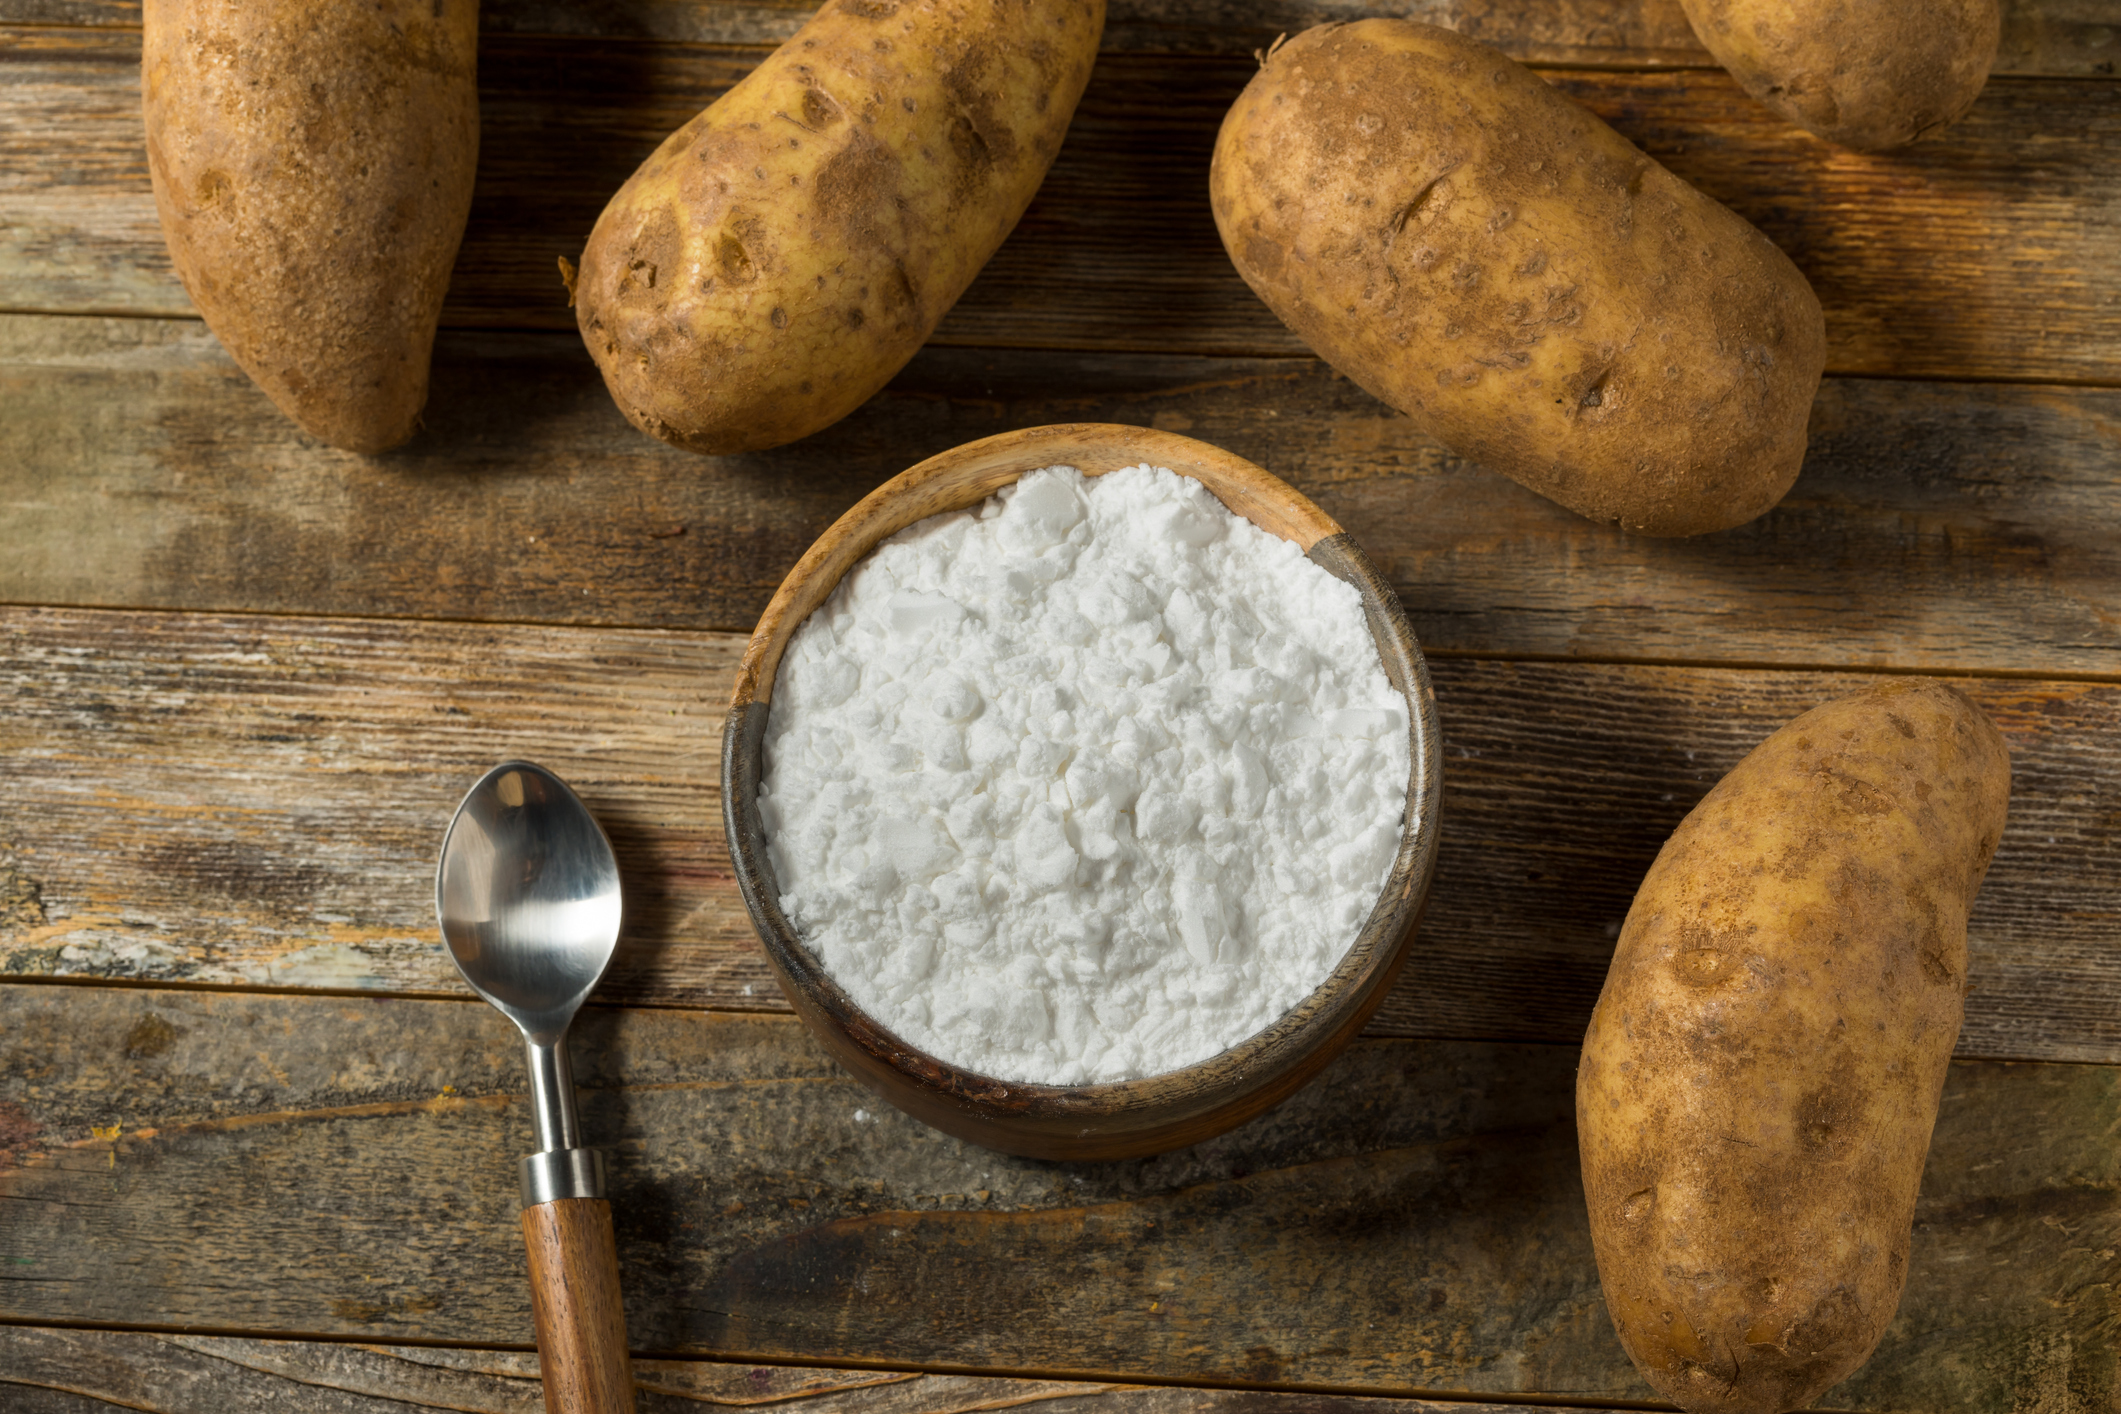 Resistant Starch: What Is It & Can It Help?